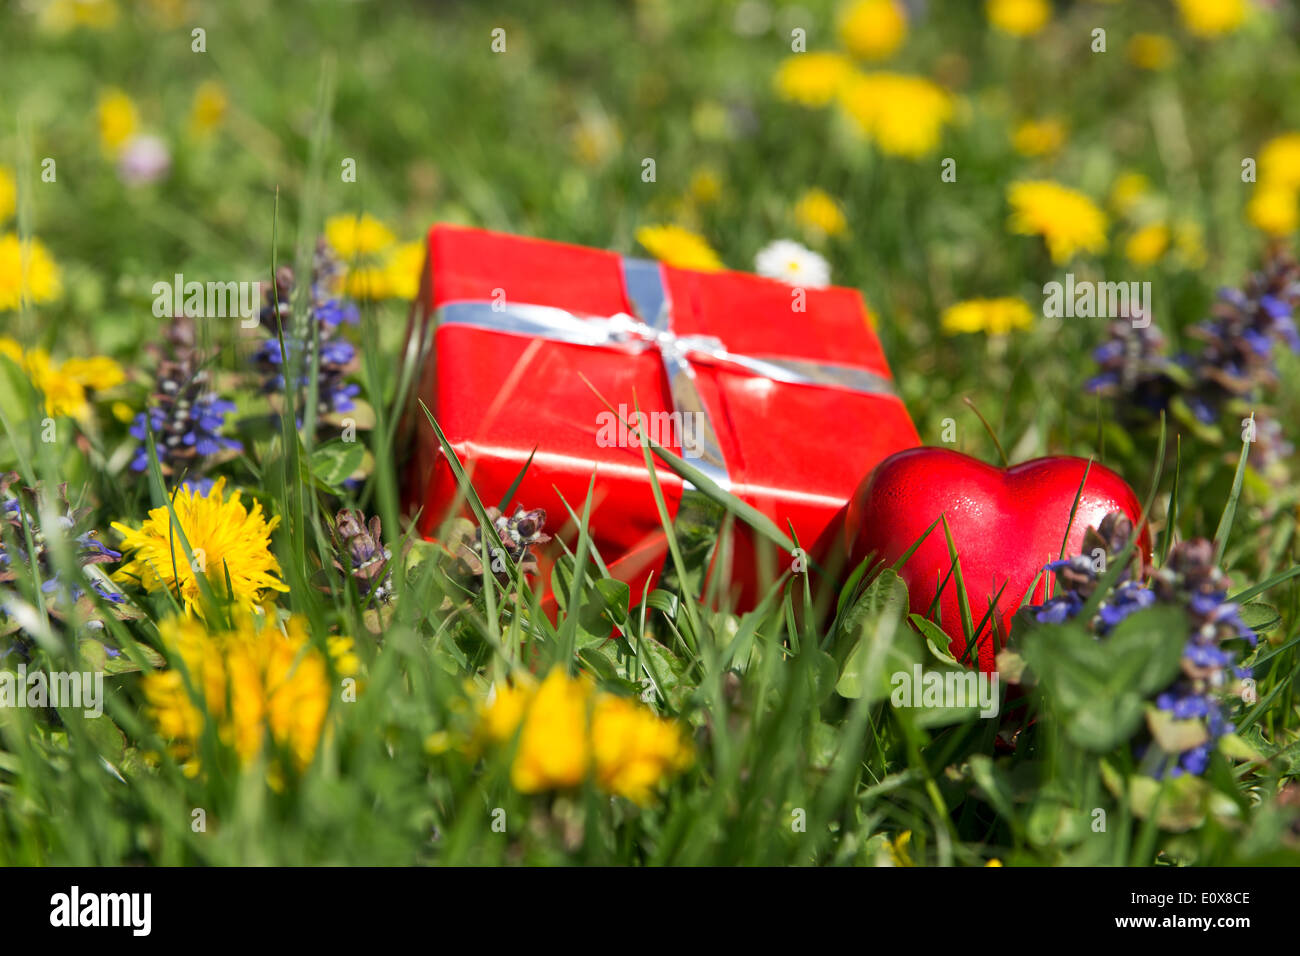 a red gift and heart in front of a spring meadow Stock Photo